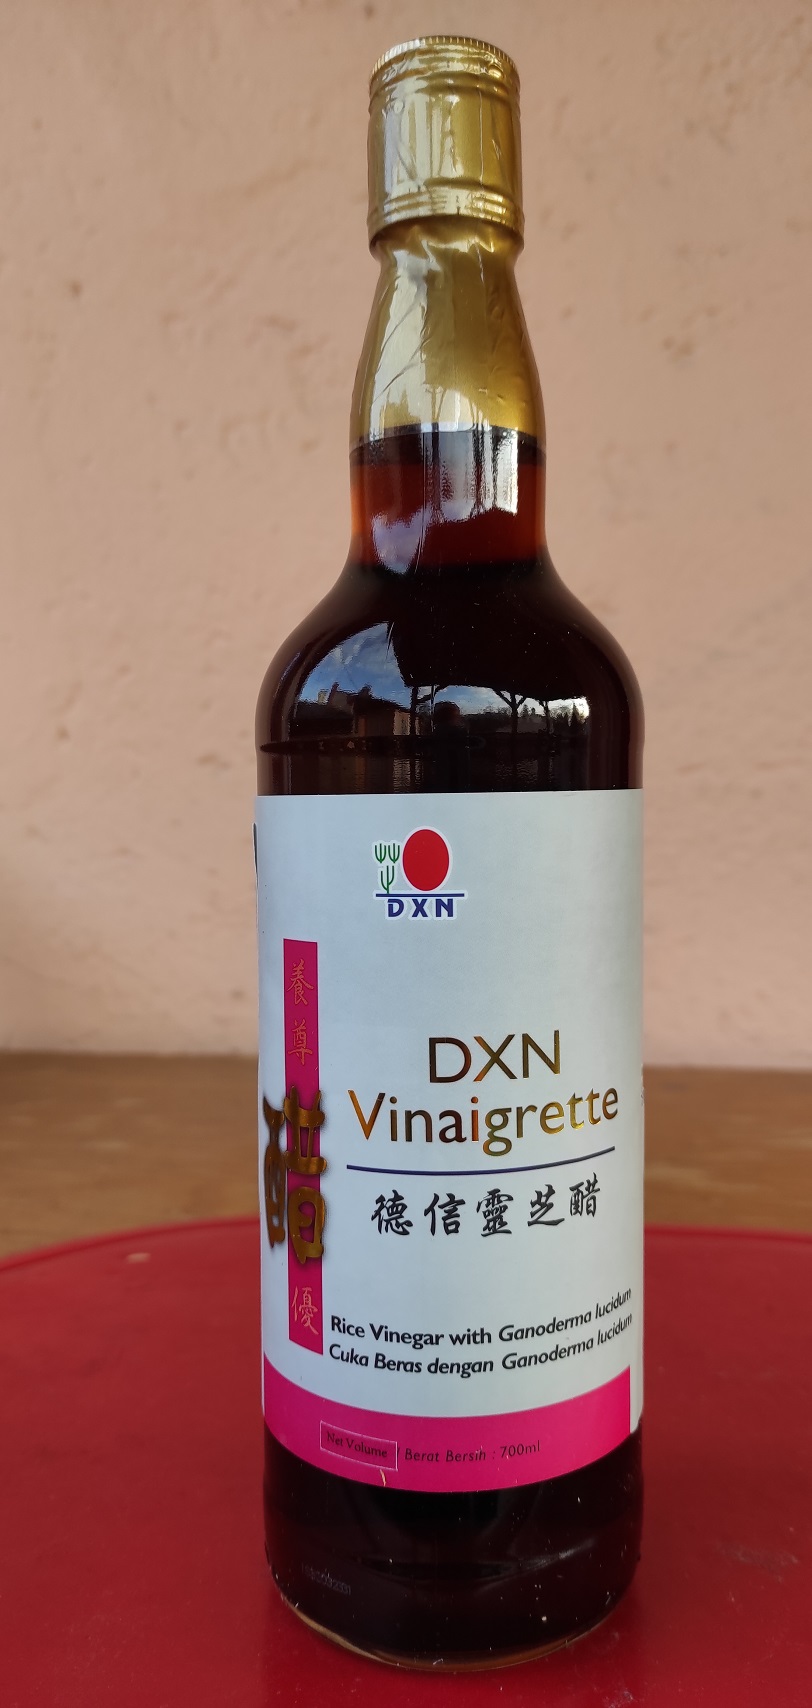 Red yeat rice vinegar with Reishi mushroom extract from DXN beautiful bottle